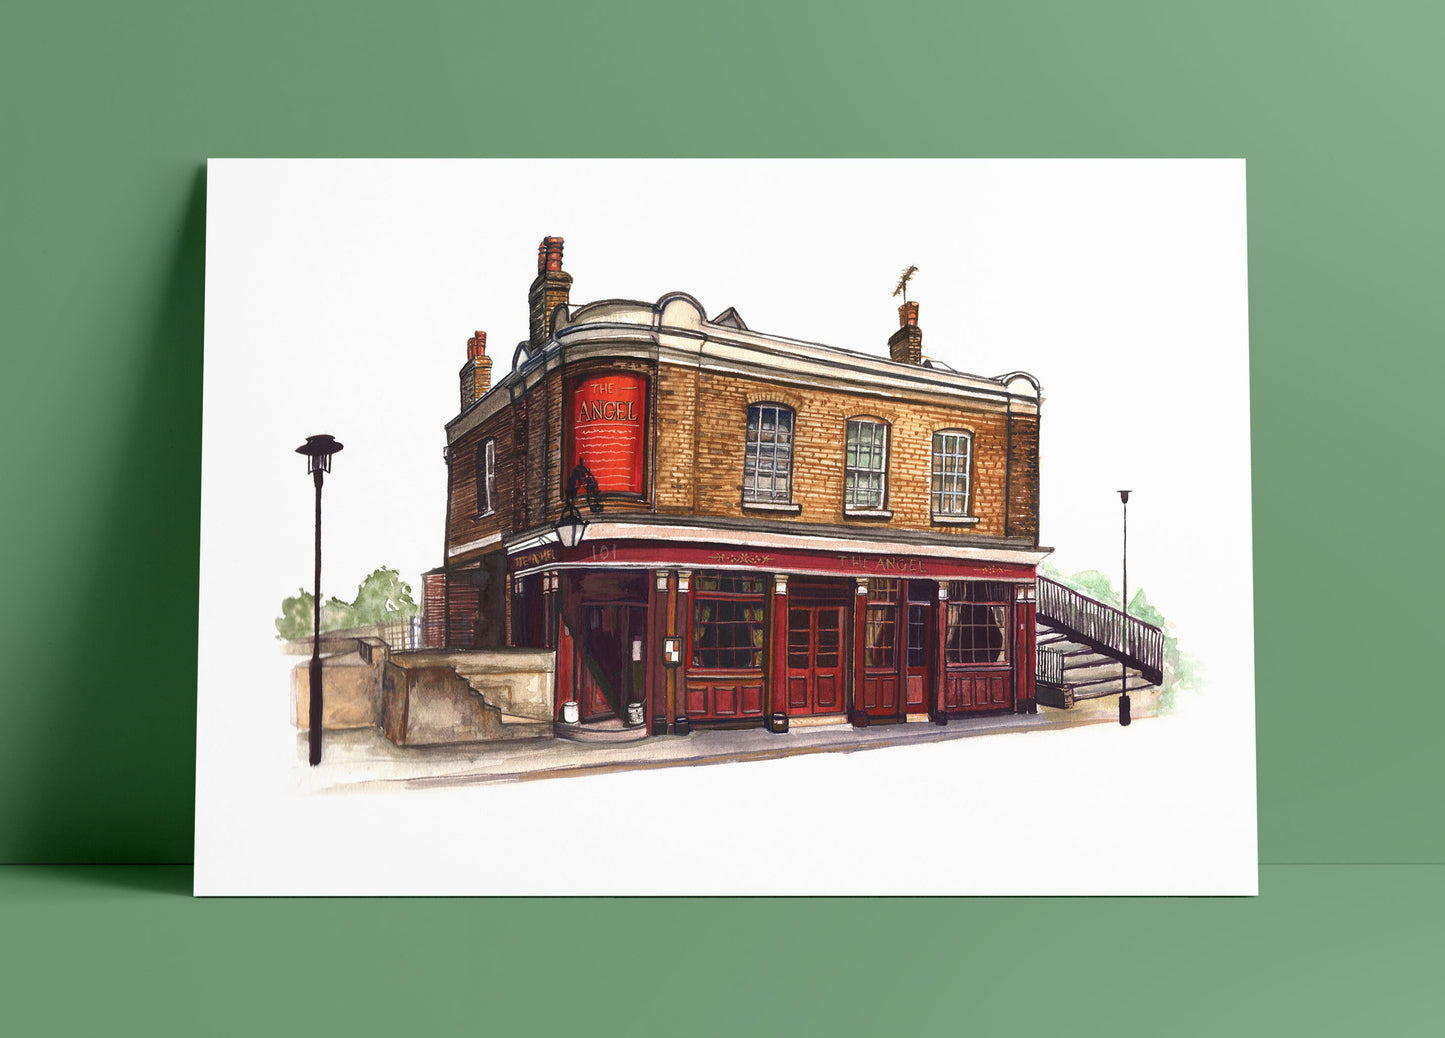 The Angel pub in Rotherhithe Art Print, Bermondsey, South London